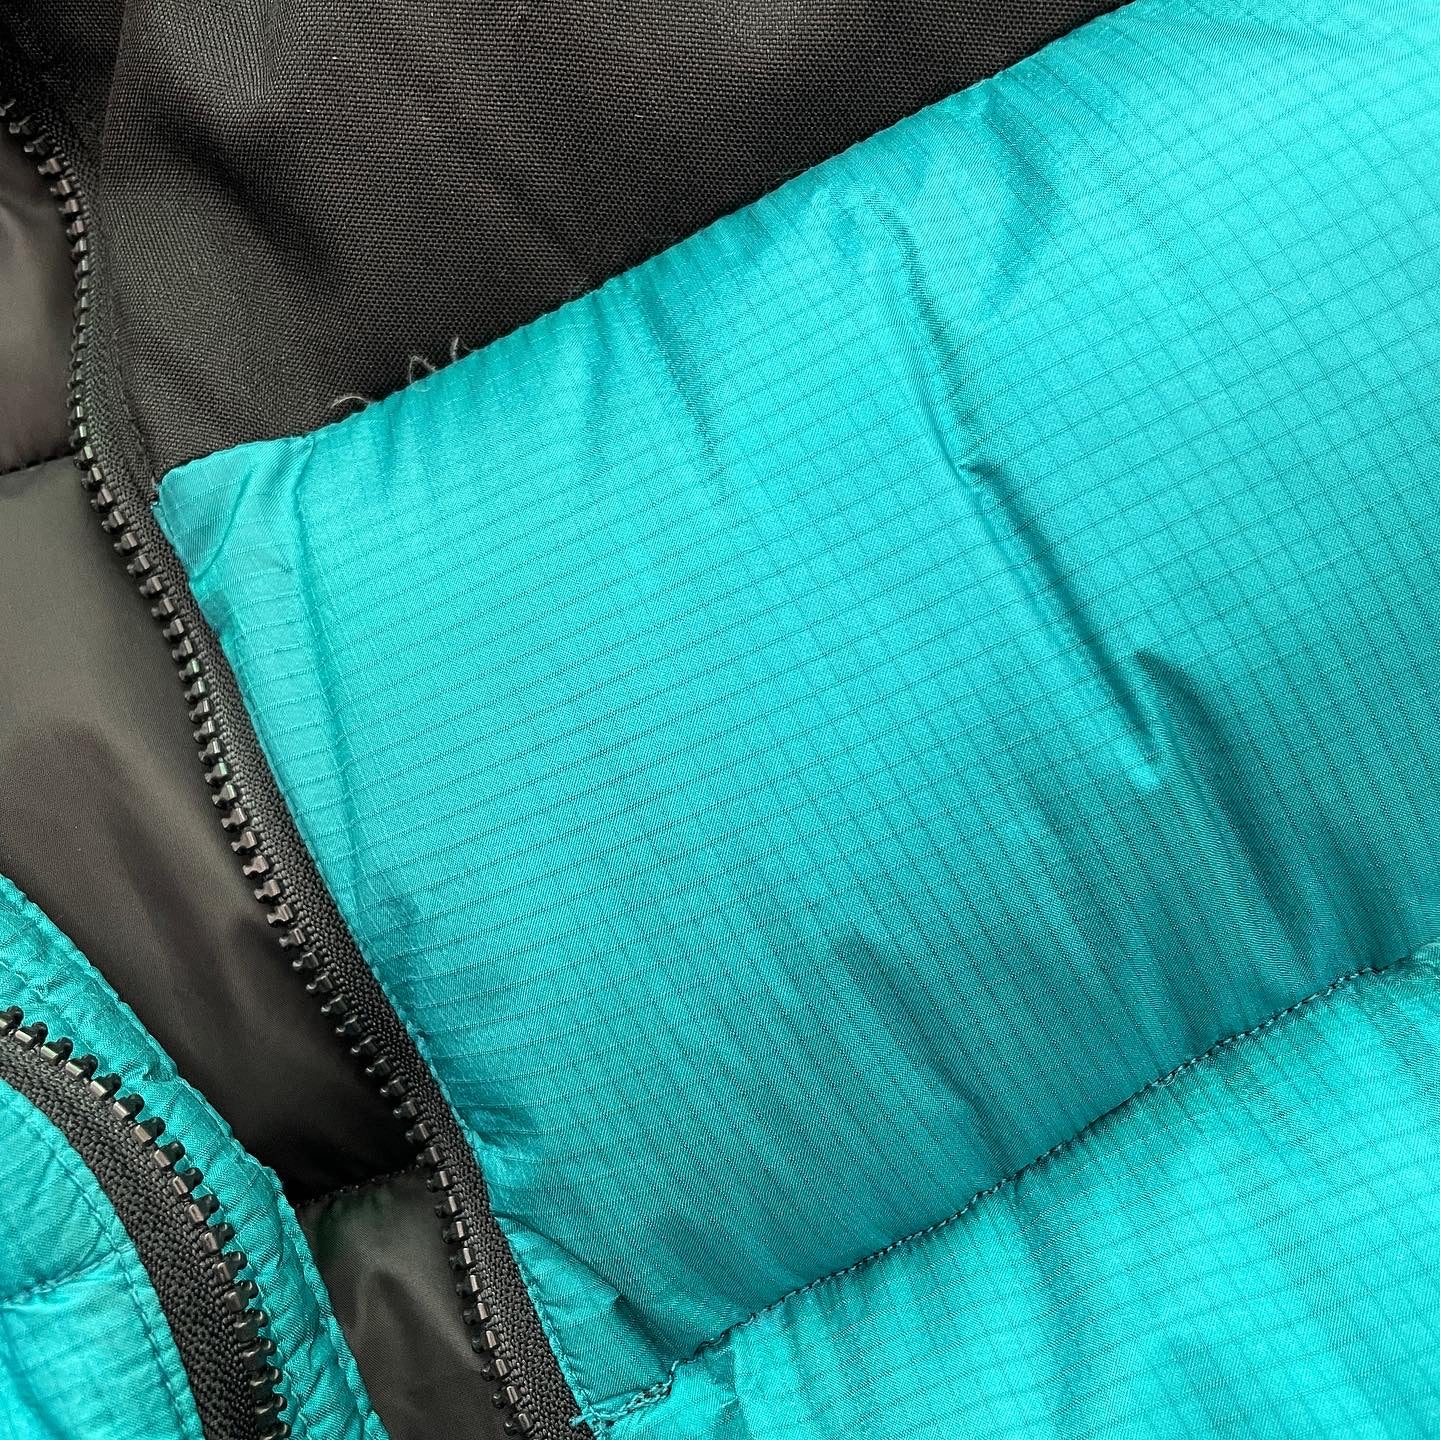 Feathered Friends GORE-TEX RipStop Nylon Down Jacket